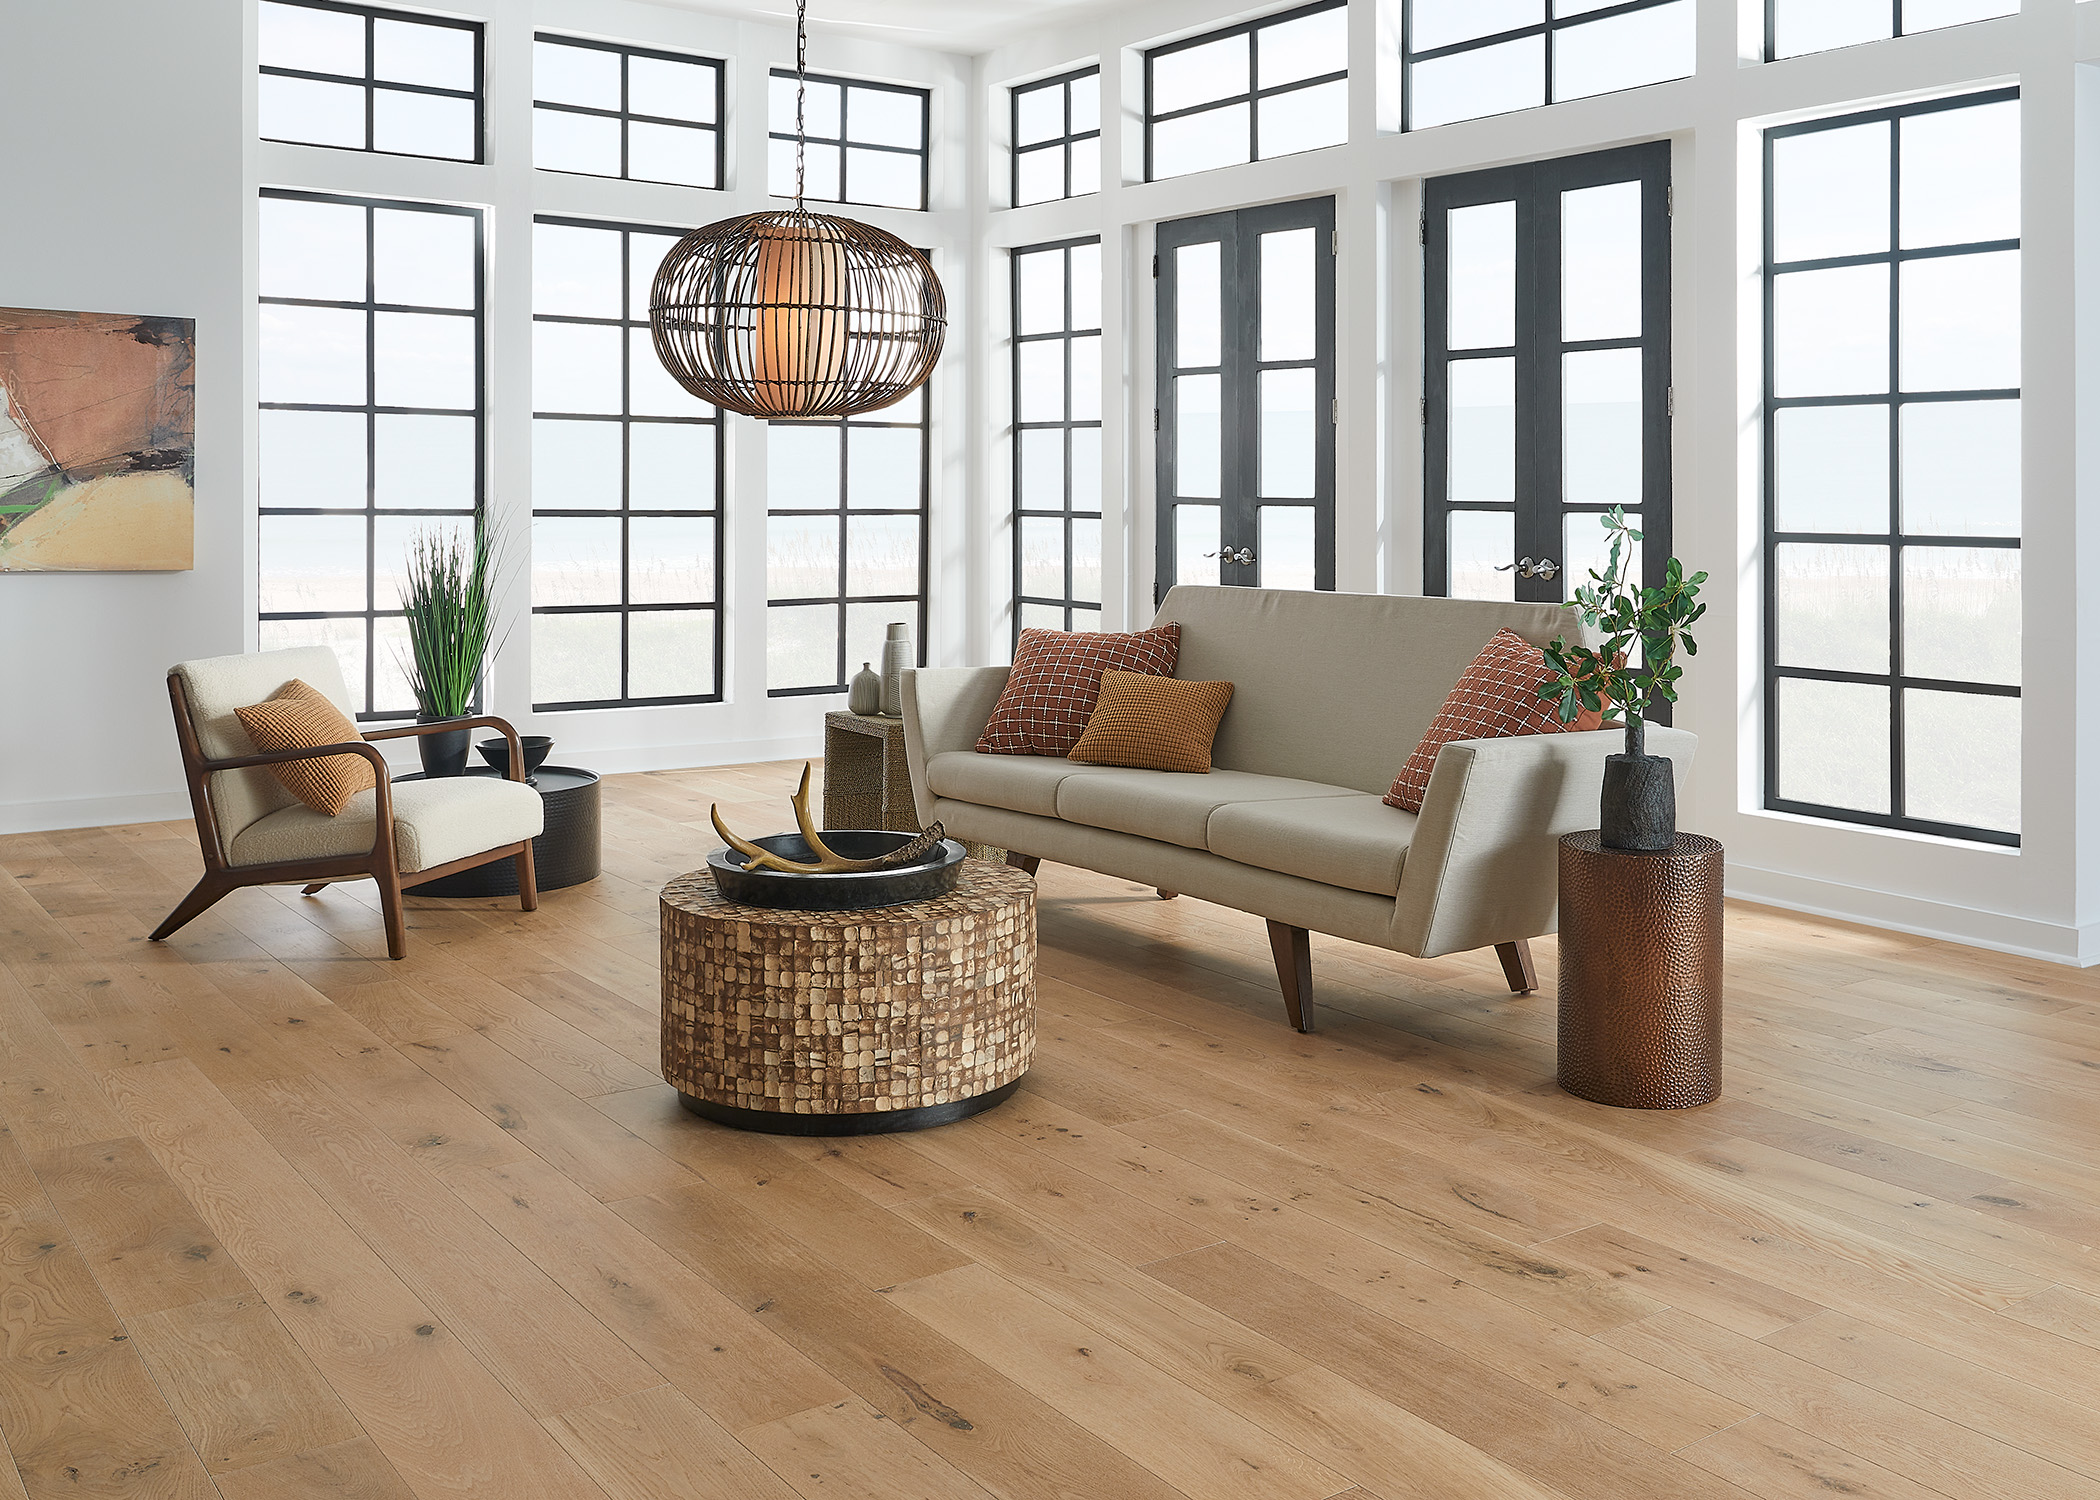 blonde engineered hardwood floor in living room with beige sofa and round wooden coffee table plus rust colored pillows and bronze metal side table